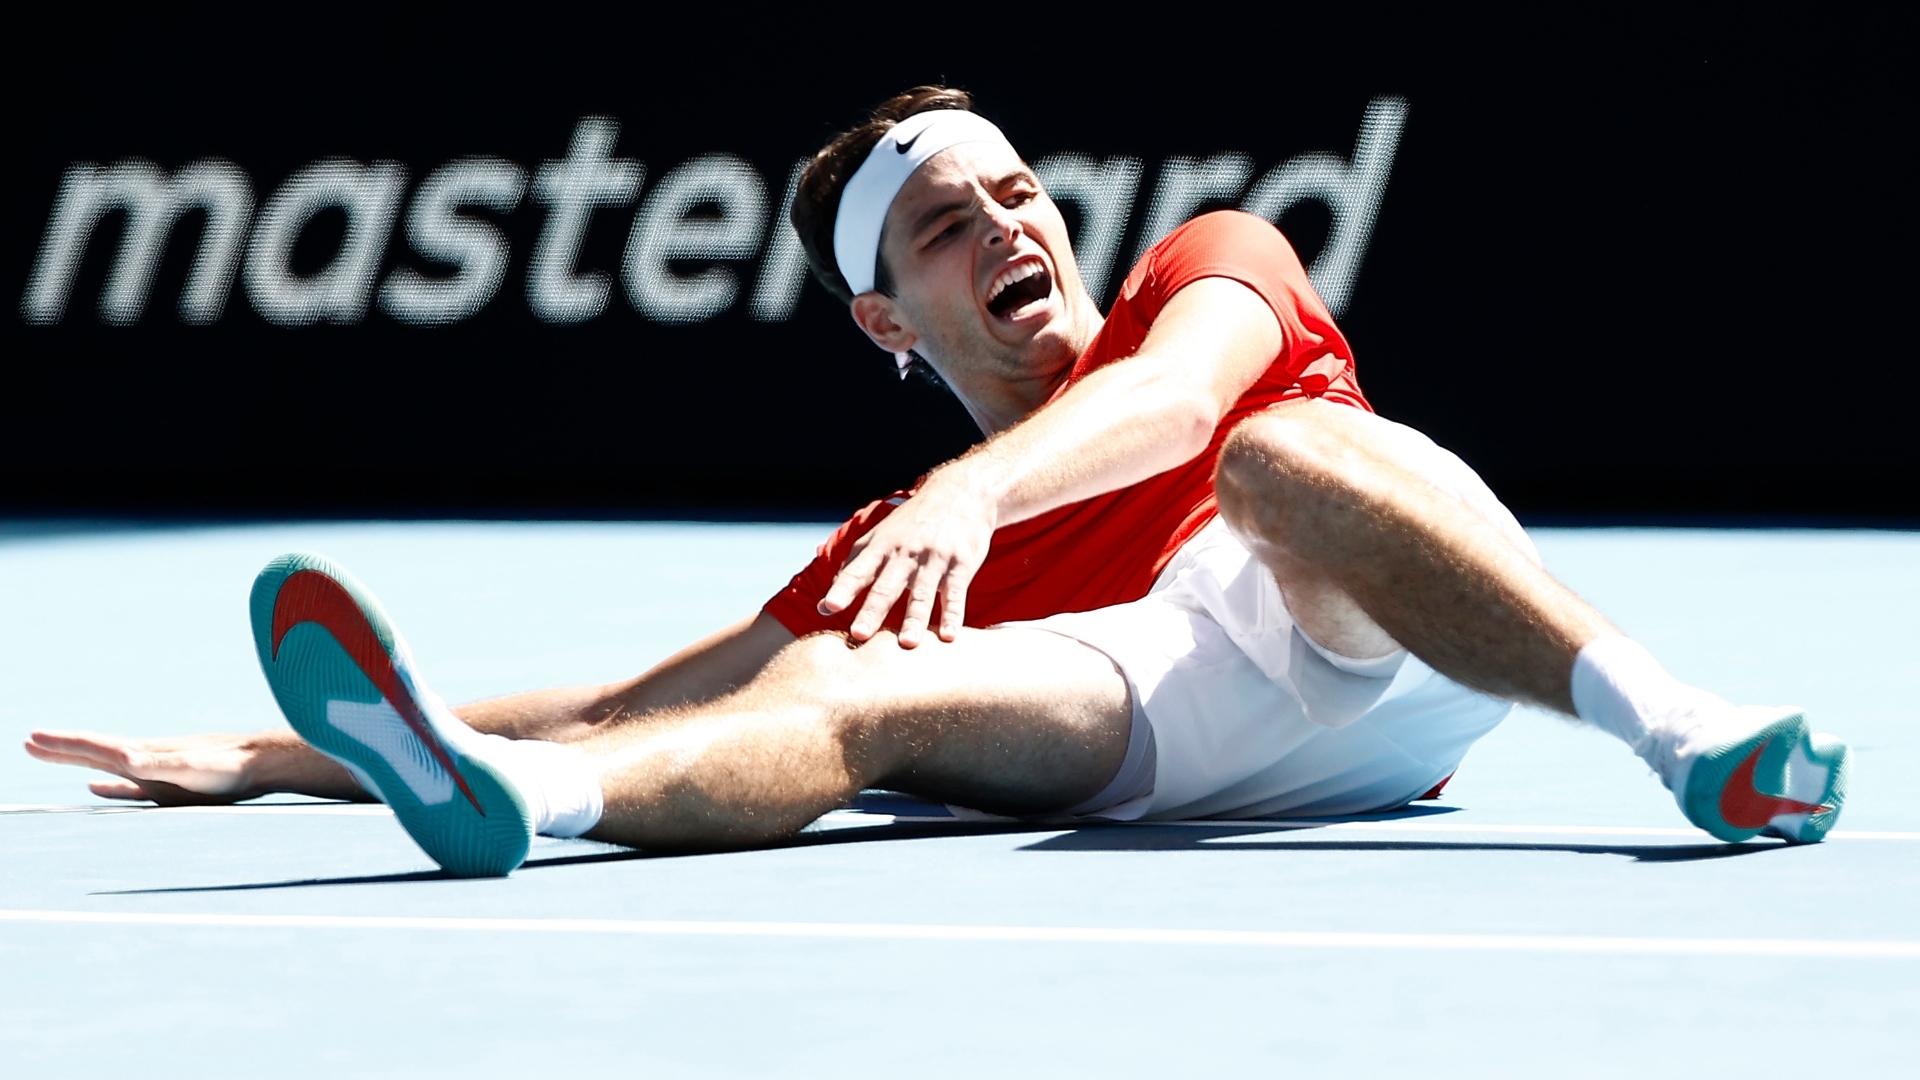 Taylor Fritz cramps up celebrating win at Australian Open - Stream the Video